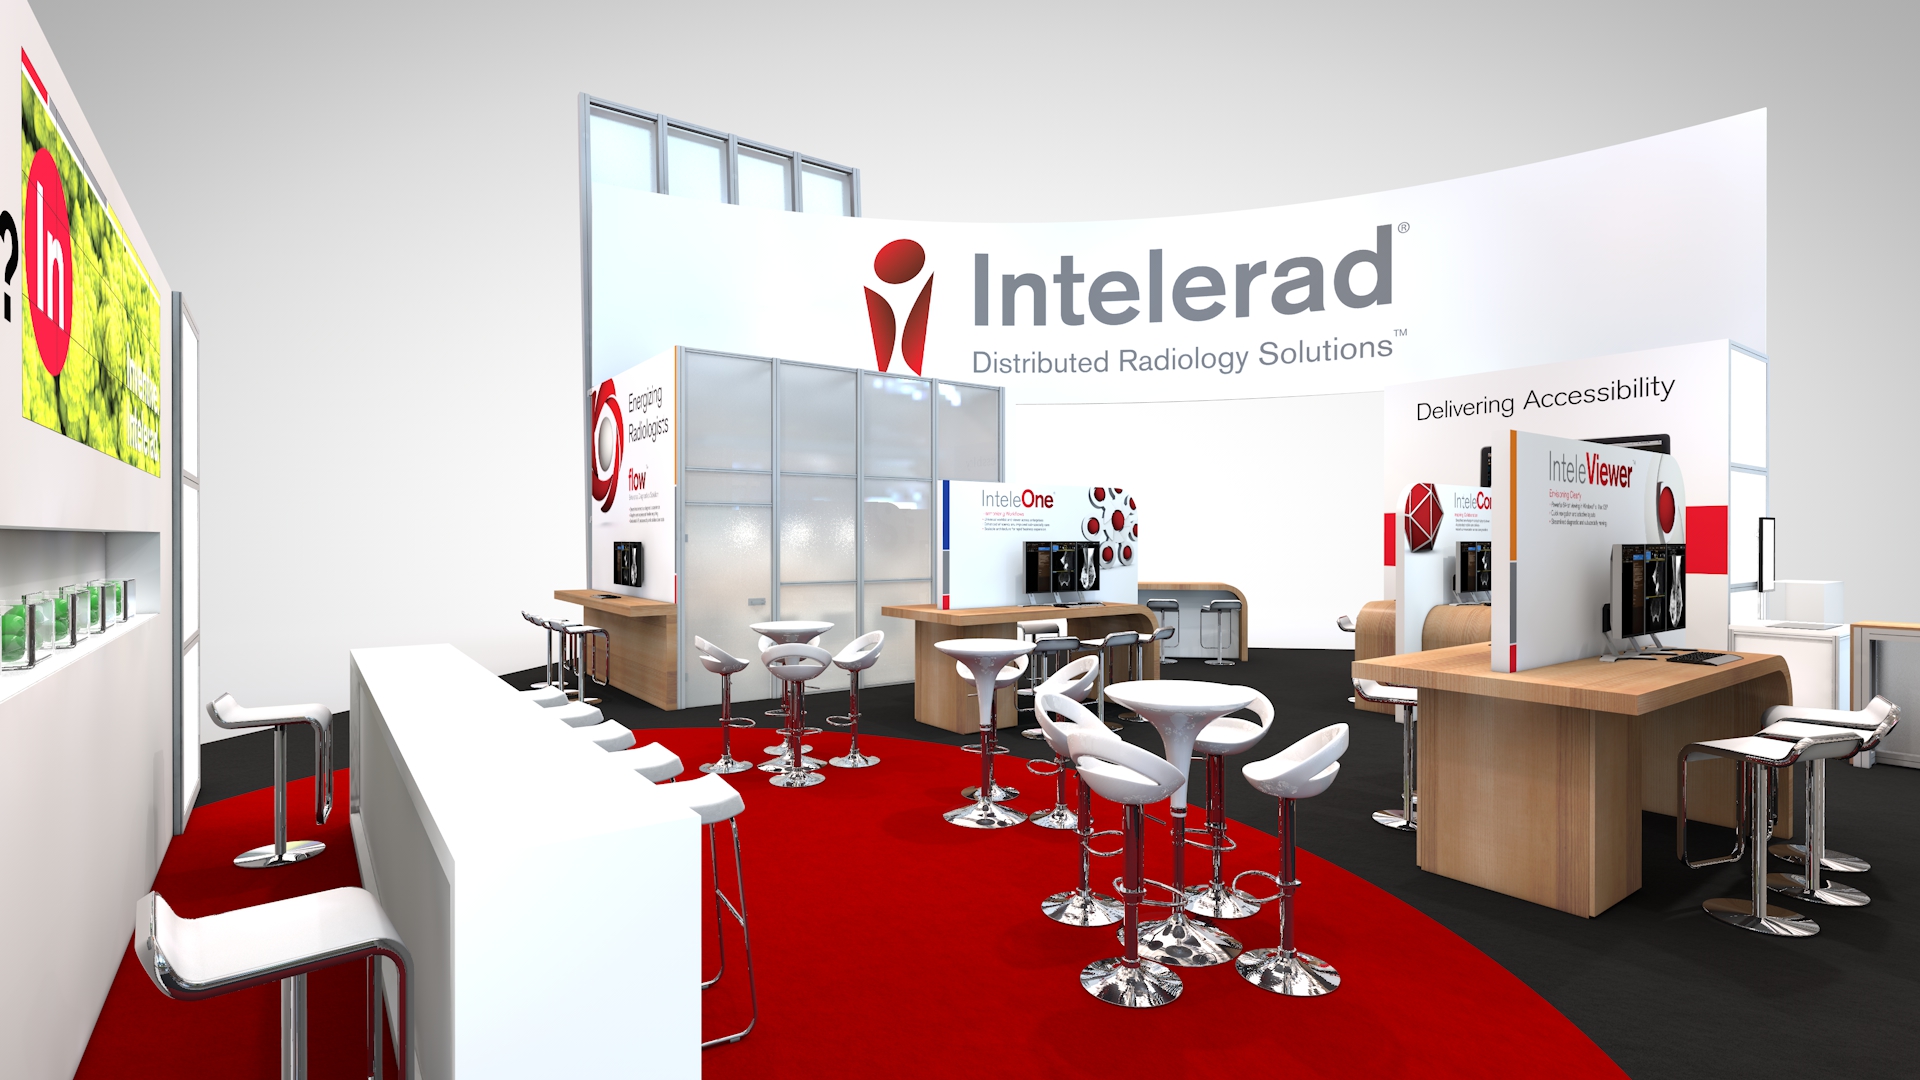 A view of Intelerad's trade show booth rental for RSNA at Chicago's McCormick place